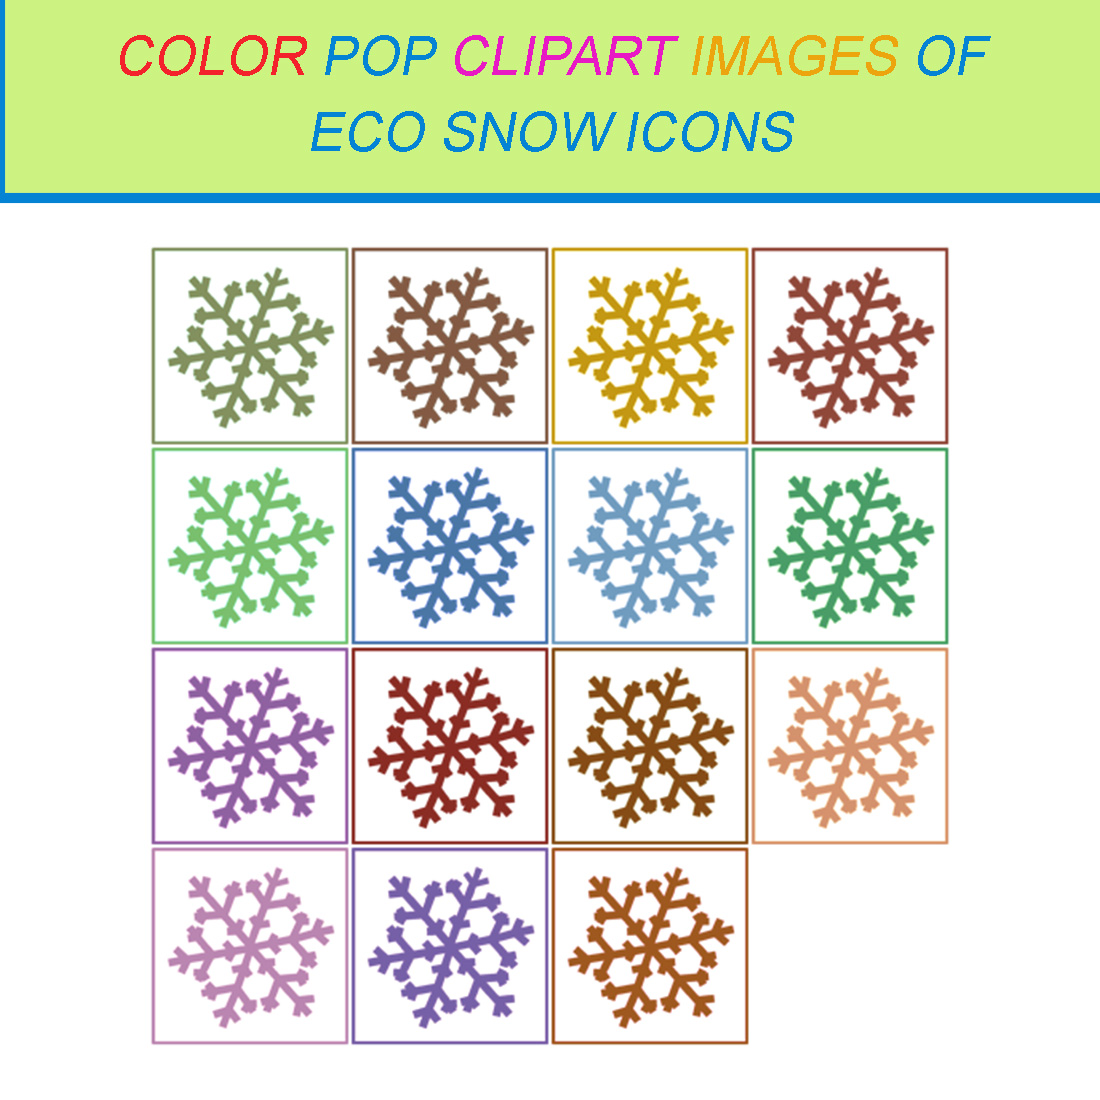 15 COLOR POP CLIPART IMAGES OF ECO SNOW ICONS cover image.